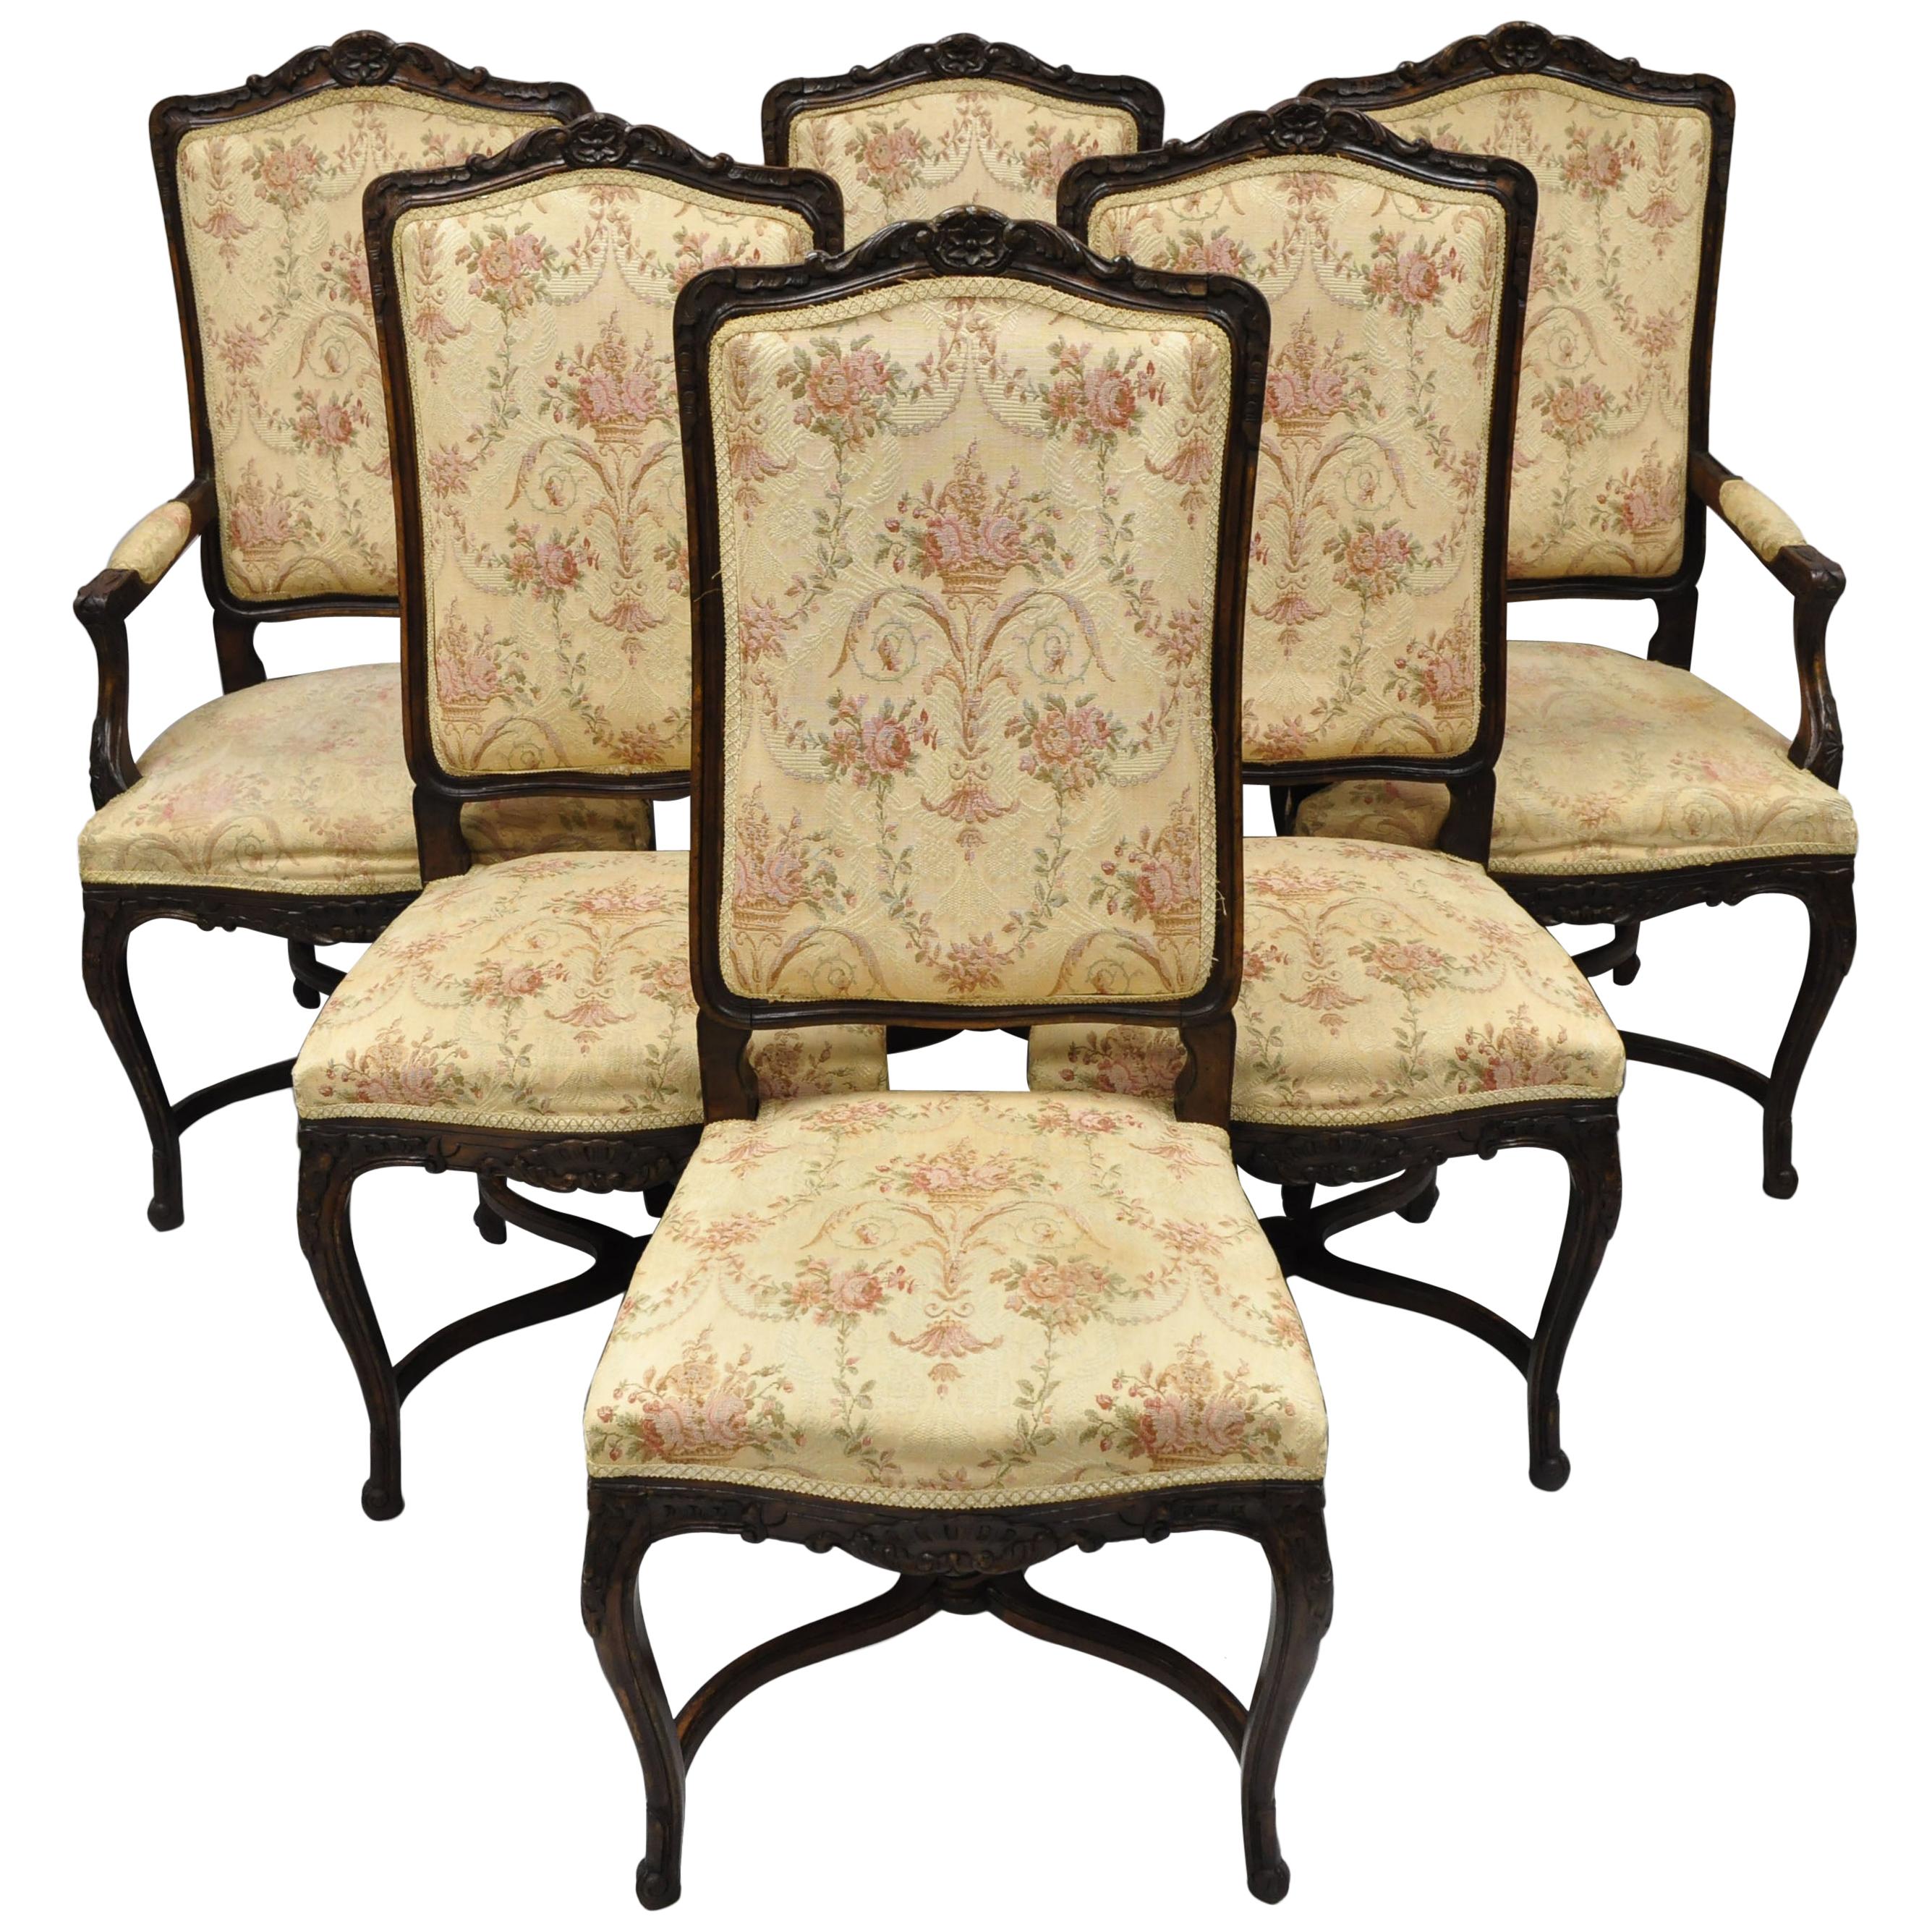 6 Vintage French Provincial Louis XV Country Style Upholstered Dining Chairs Set